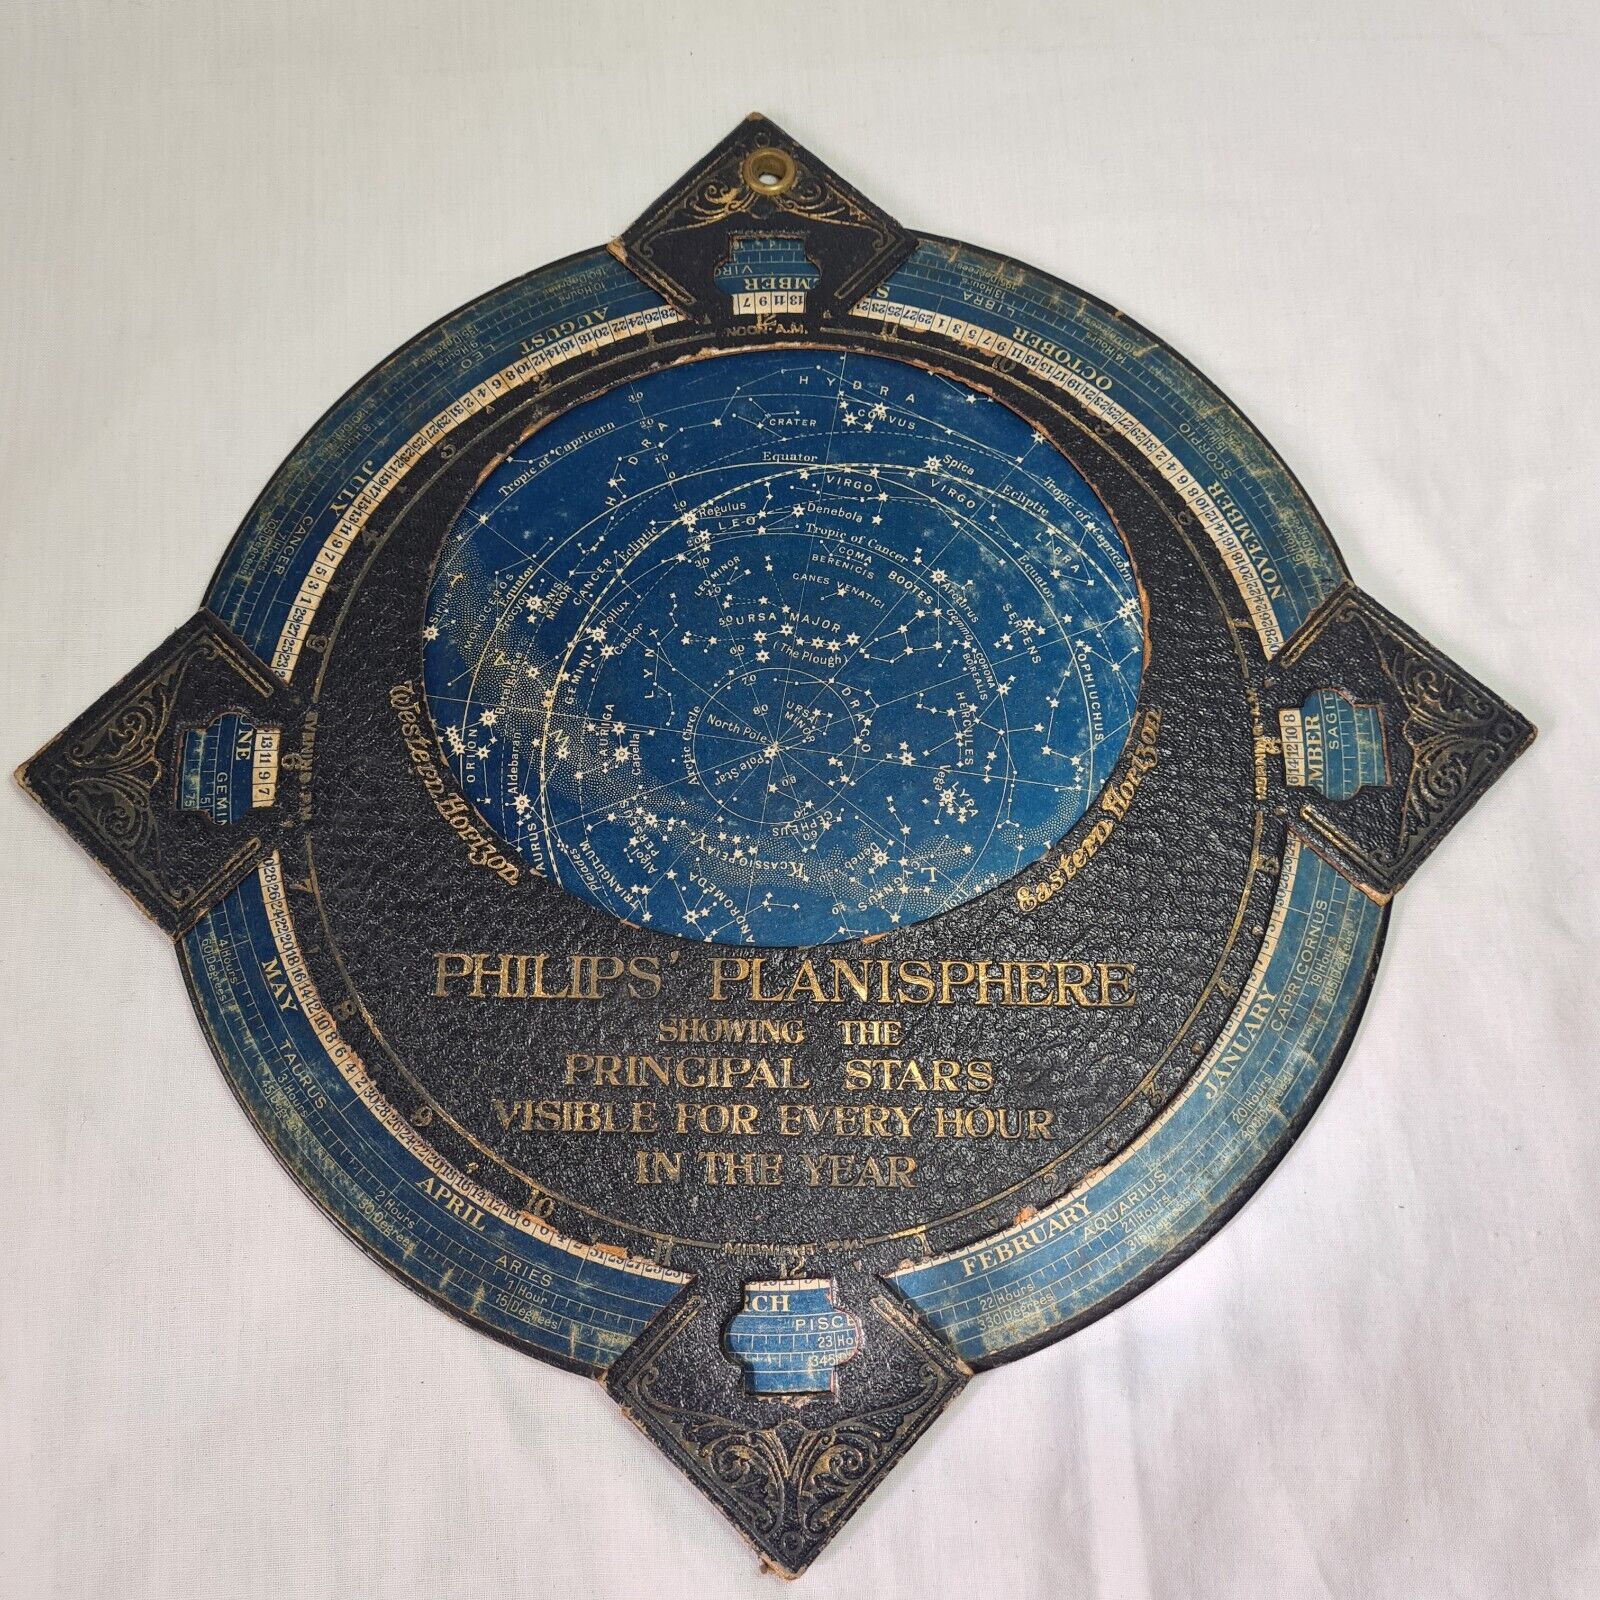 Antique Philips' Planisphere. To Study The Principal Stars By Hours. Circa 1900.